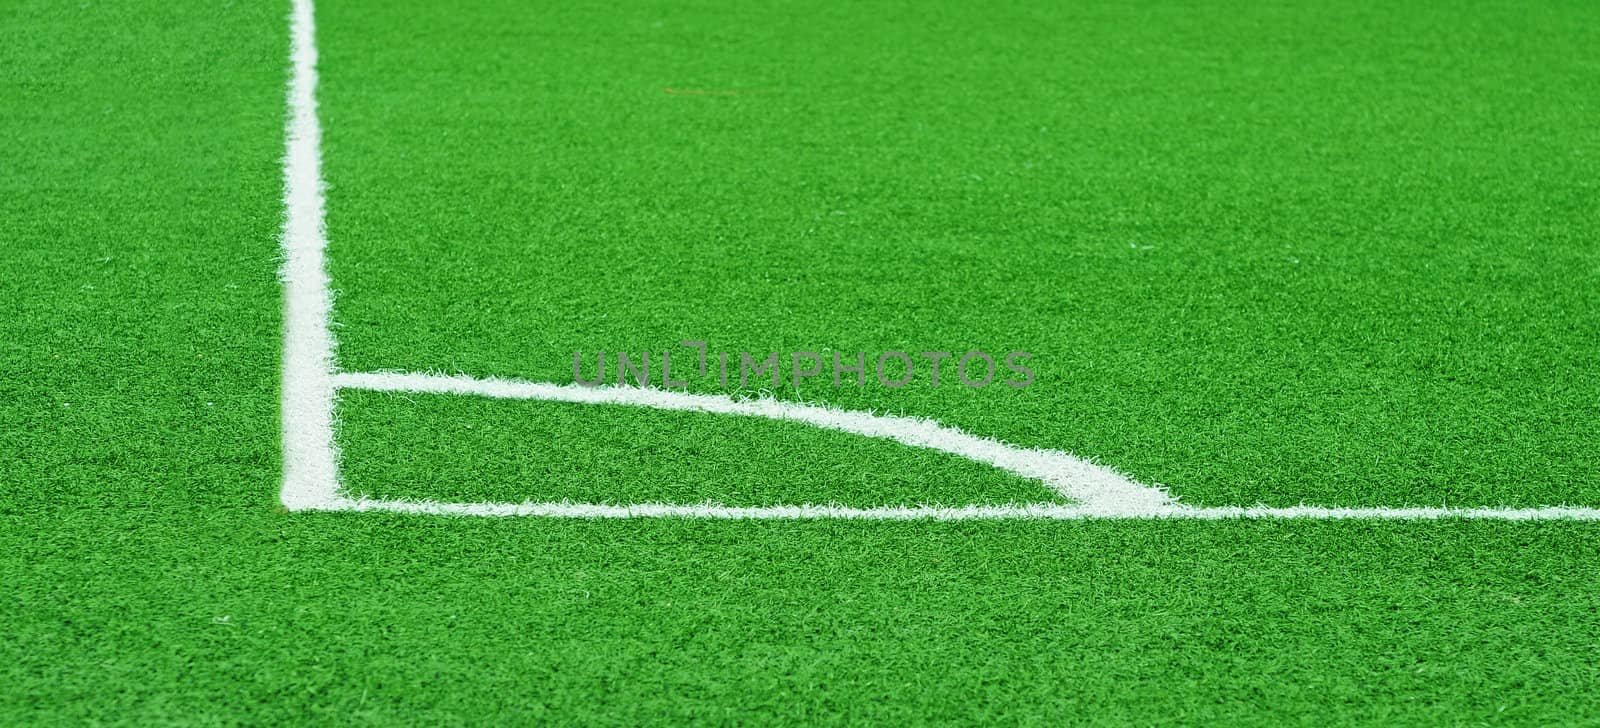 Corner of a football (soccer) field is made from synthetic lawn